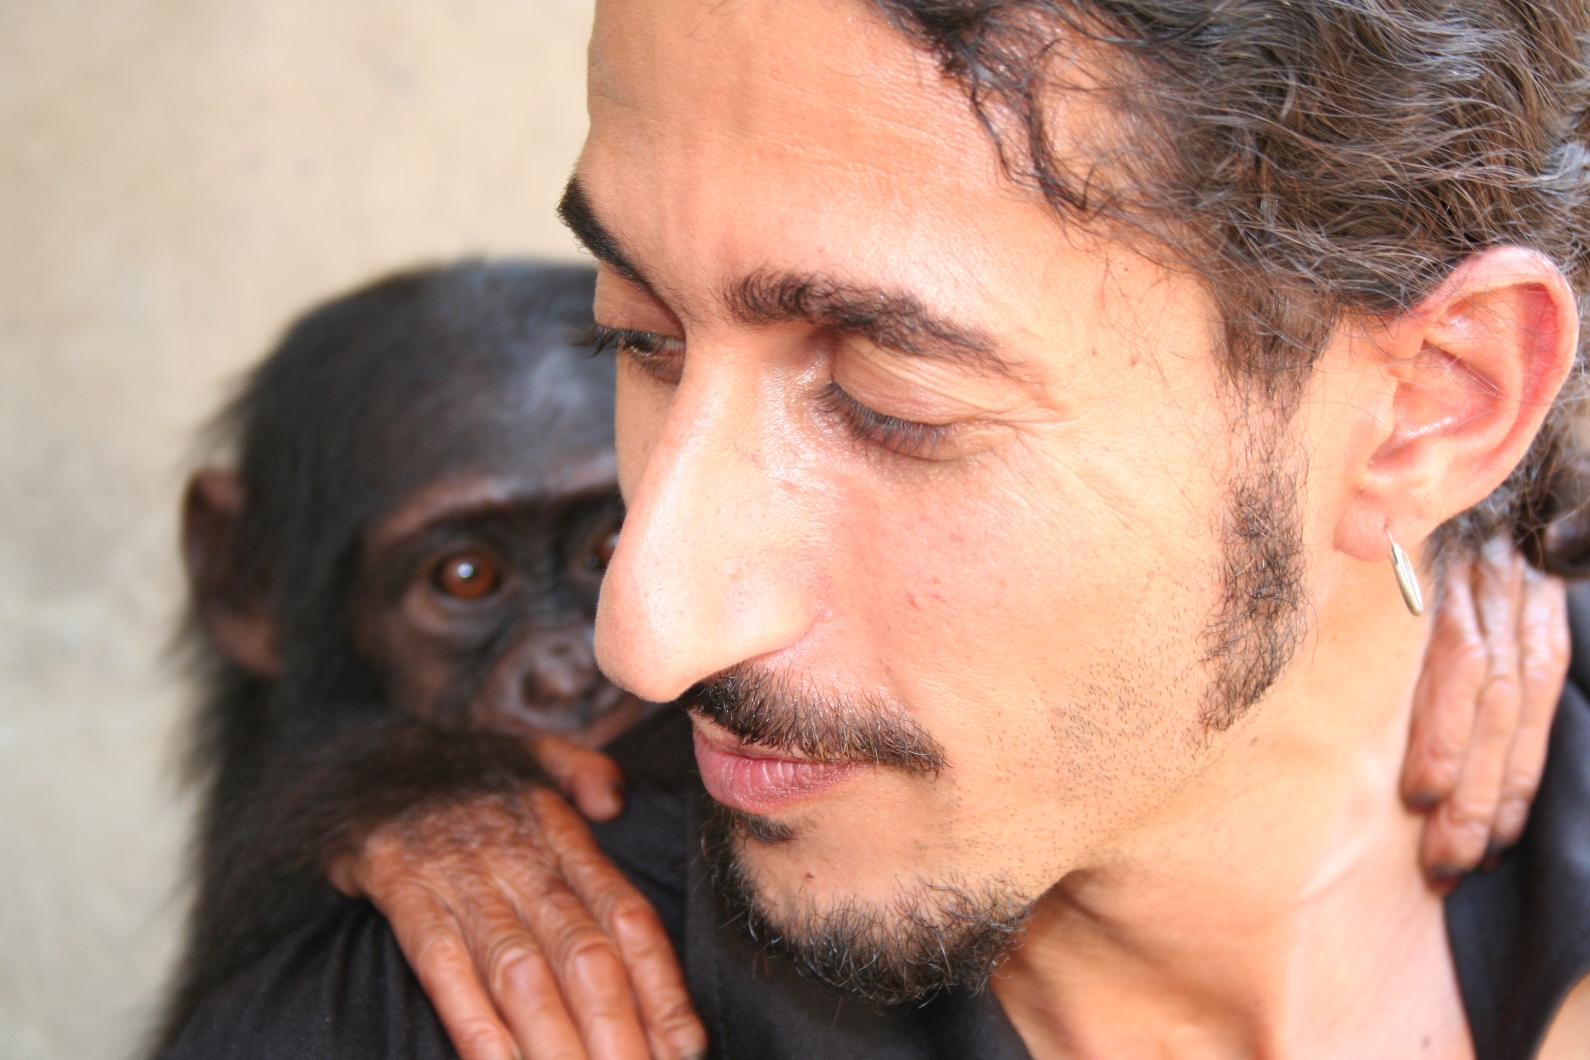 Ofir Drori’s life work began with his rescue of an orphaned chimp he named Future. Photo courtesy of EAGLE Network